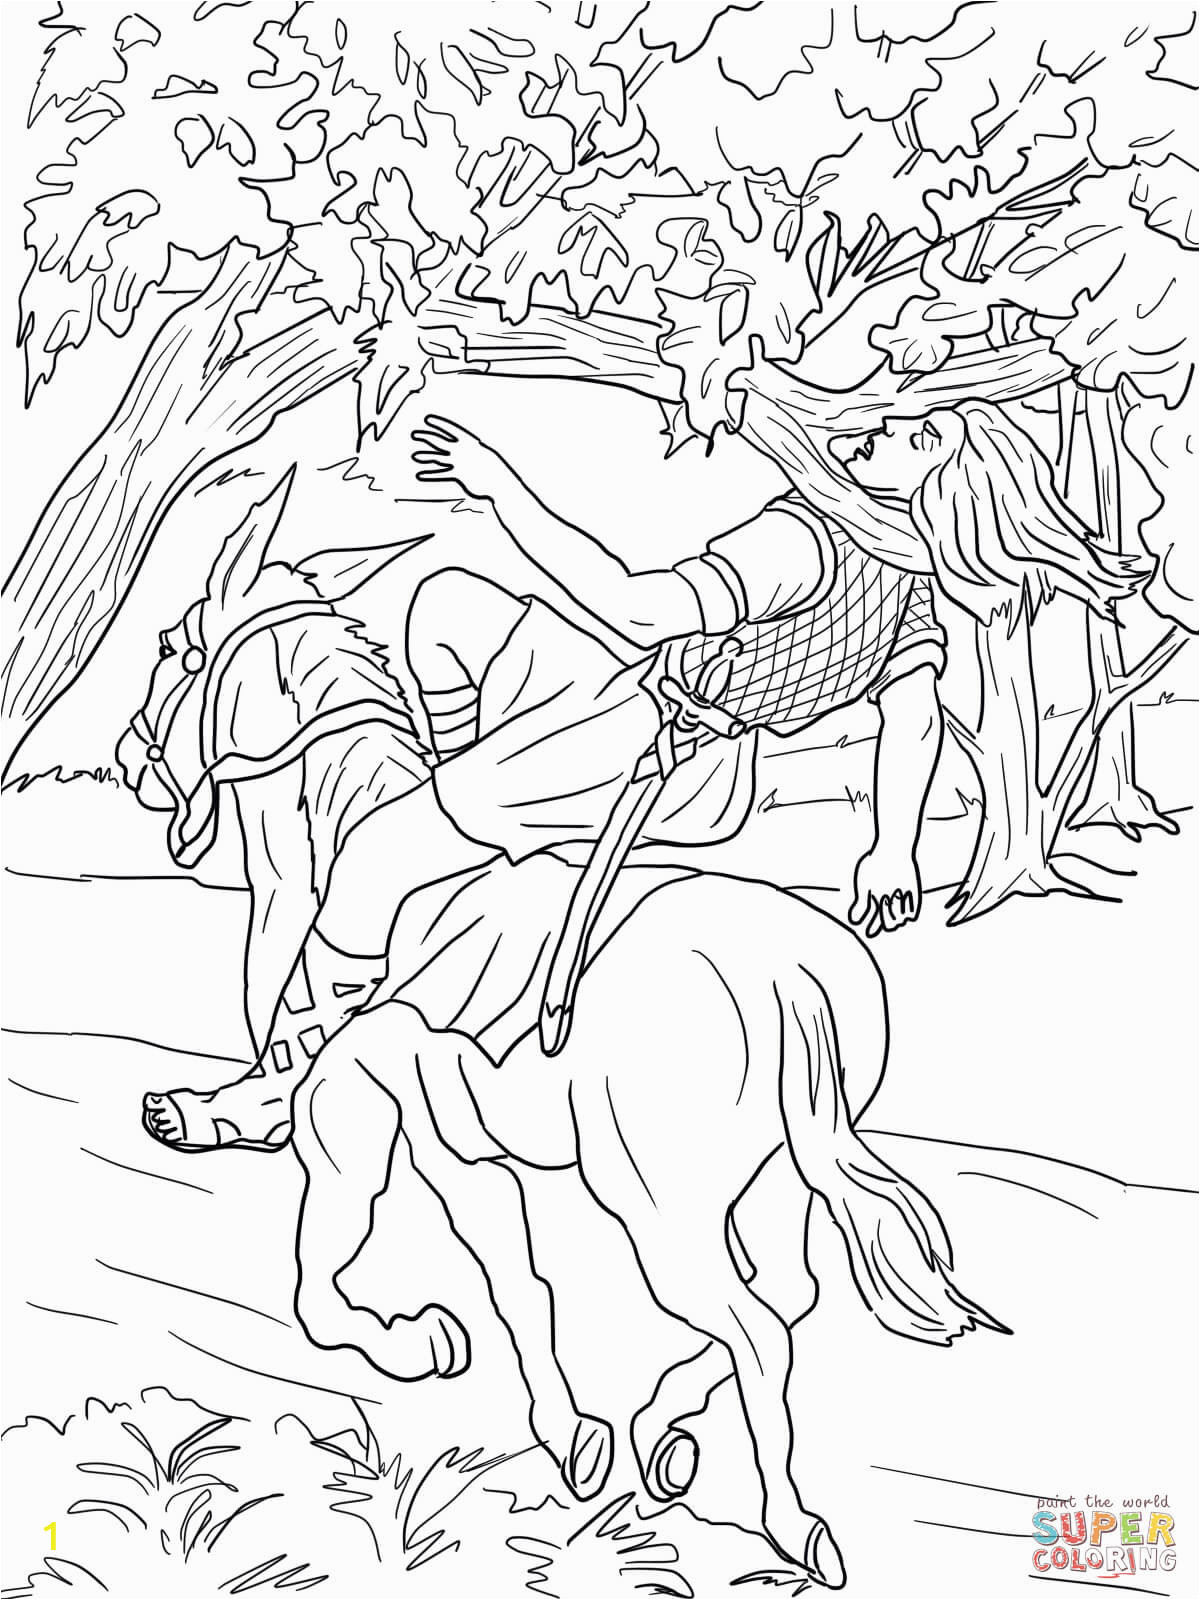 King David and Absalom Coloring Pages King David and Absalom Coloring Page Sketch Coloring Page